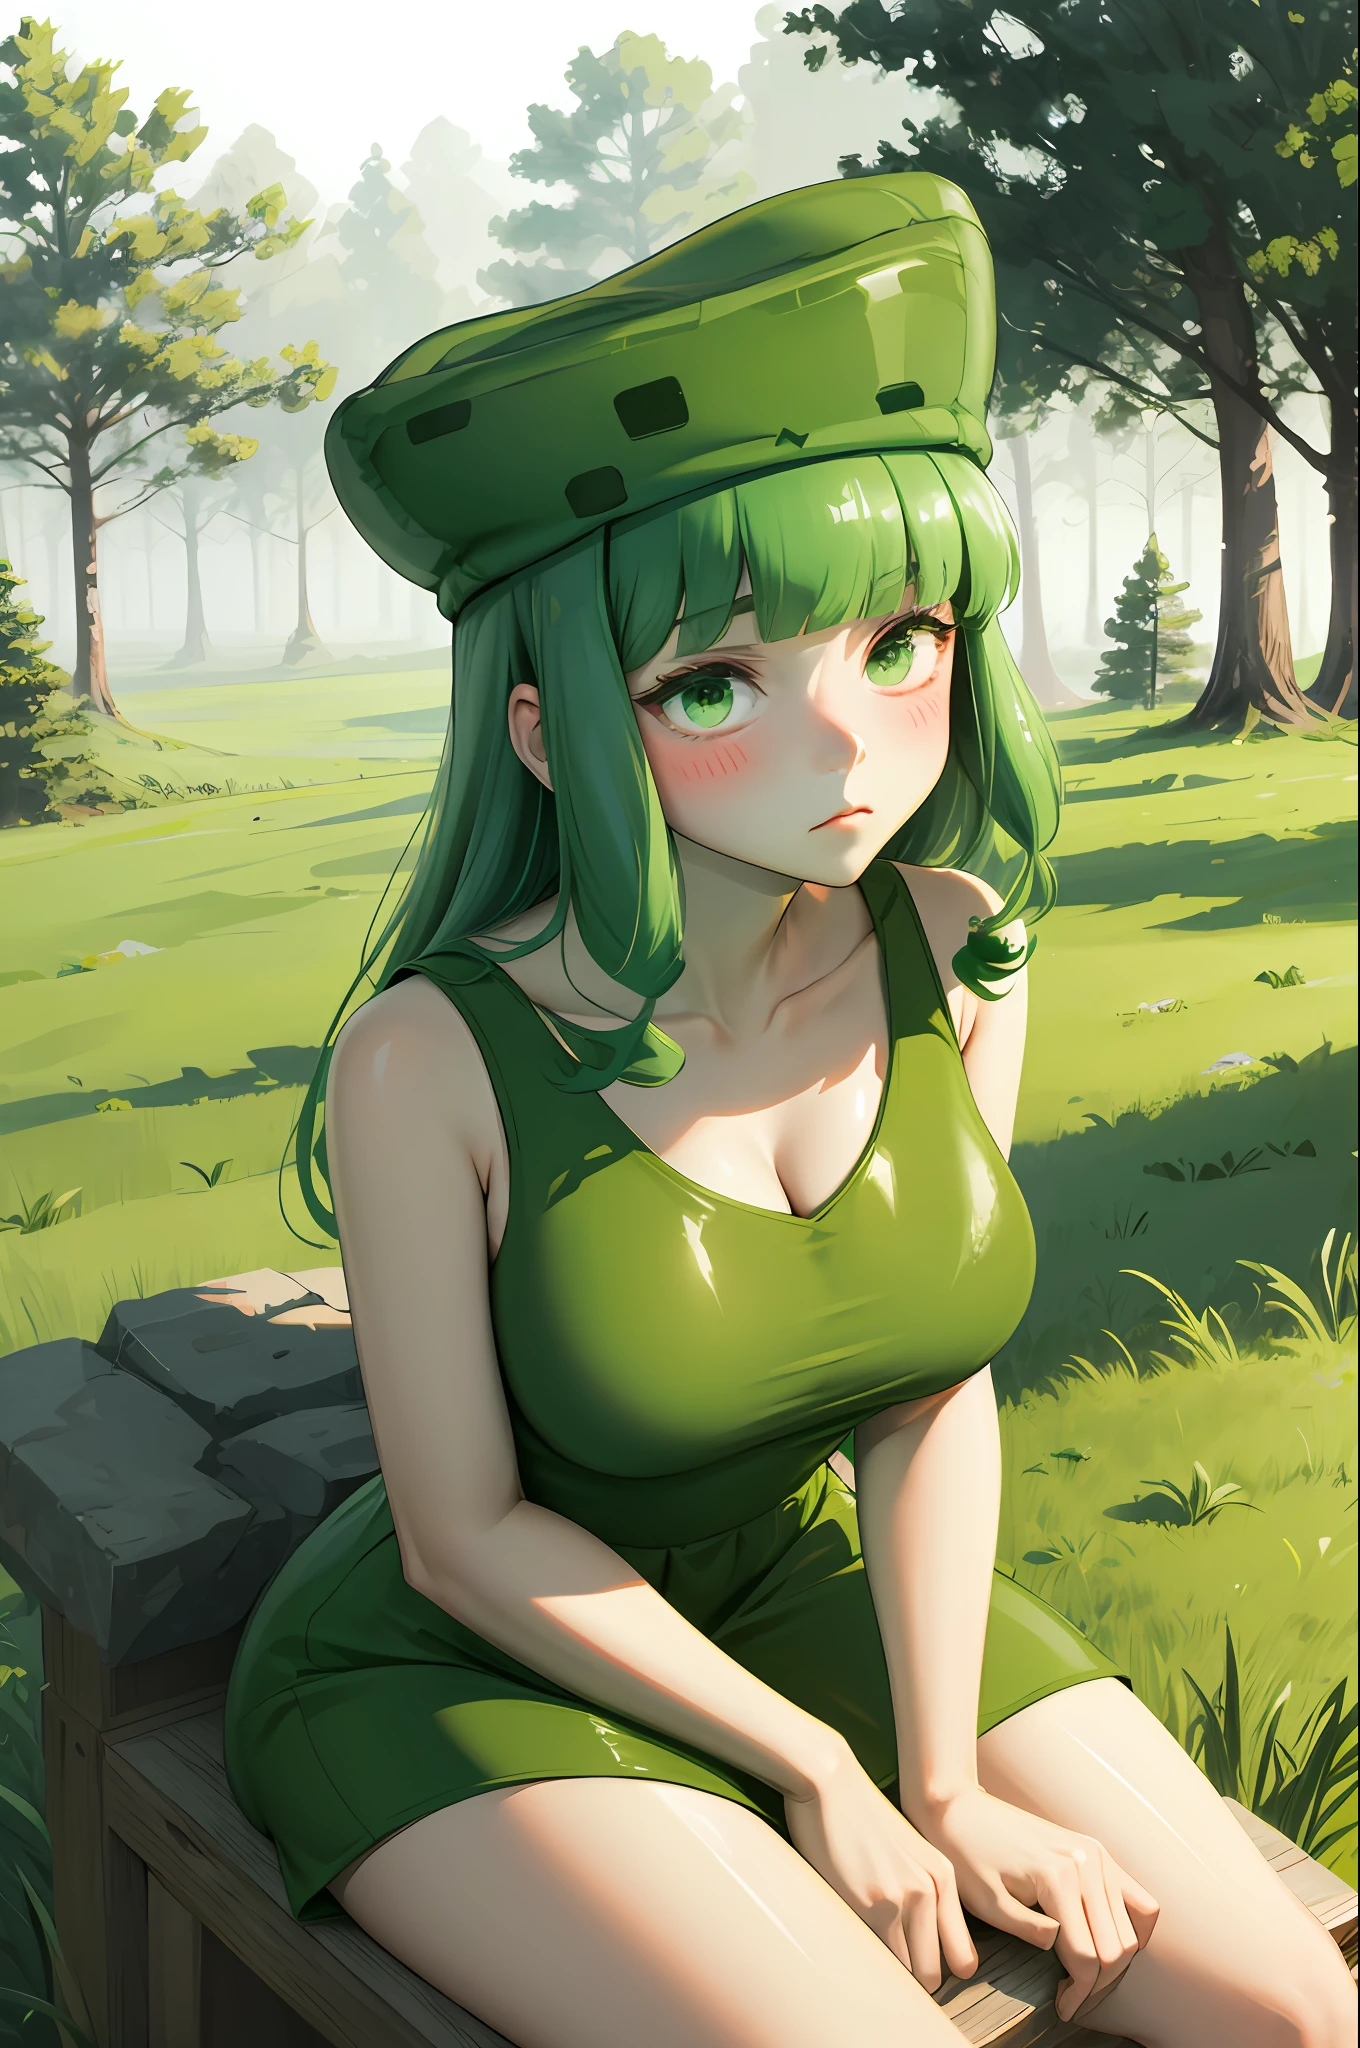 masterpiece, best quality, slim3, green skin, slime girl,blush on face,green hat,green dress,big breasts,sitting on block, grass, trees, field, nervous, furrowed brow